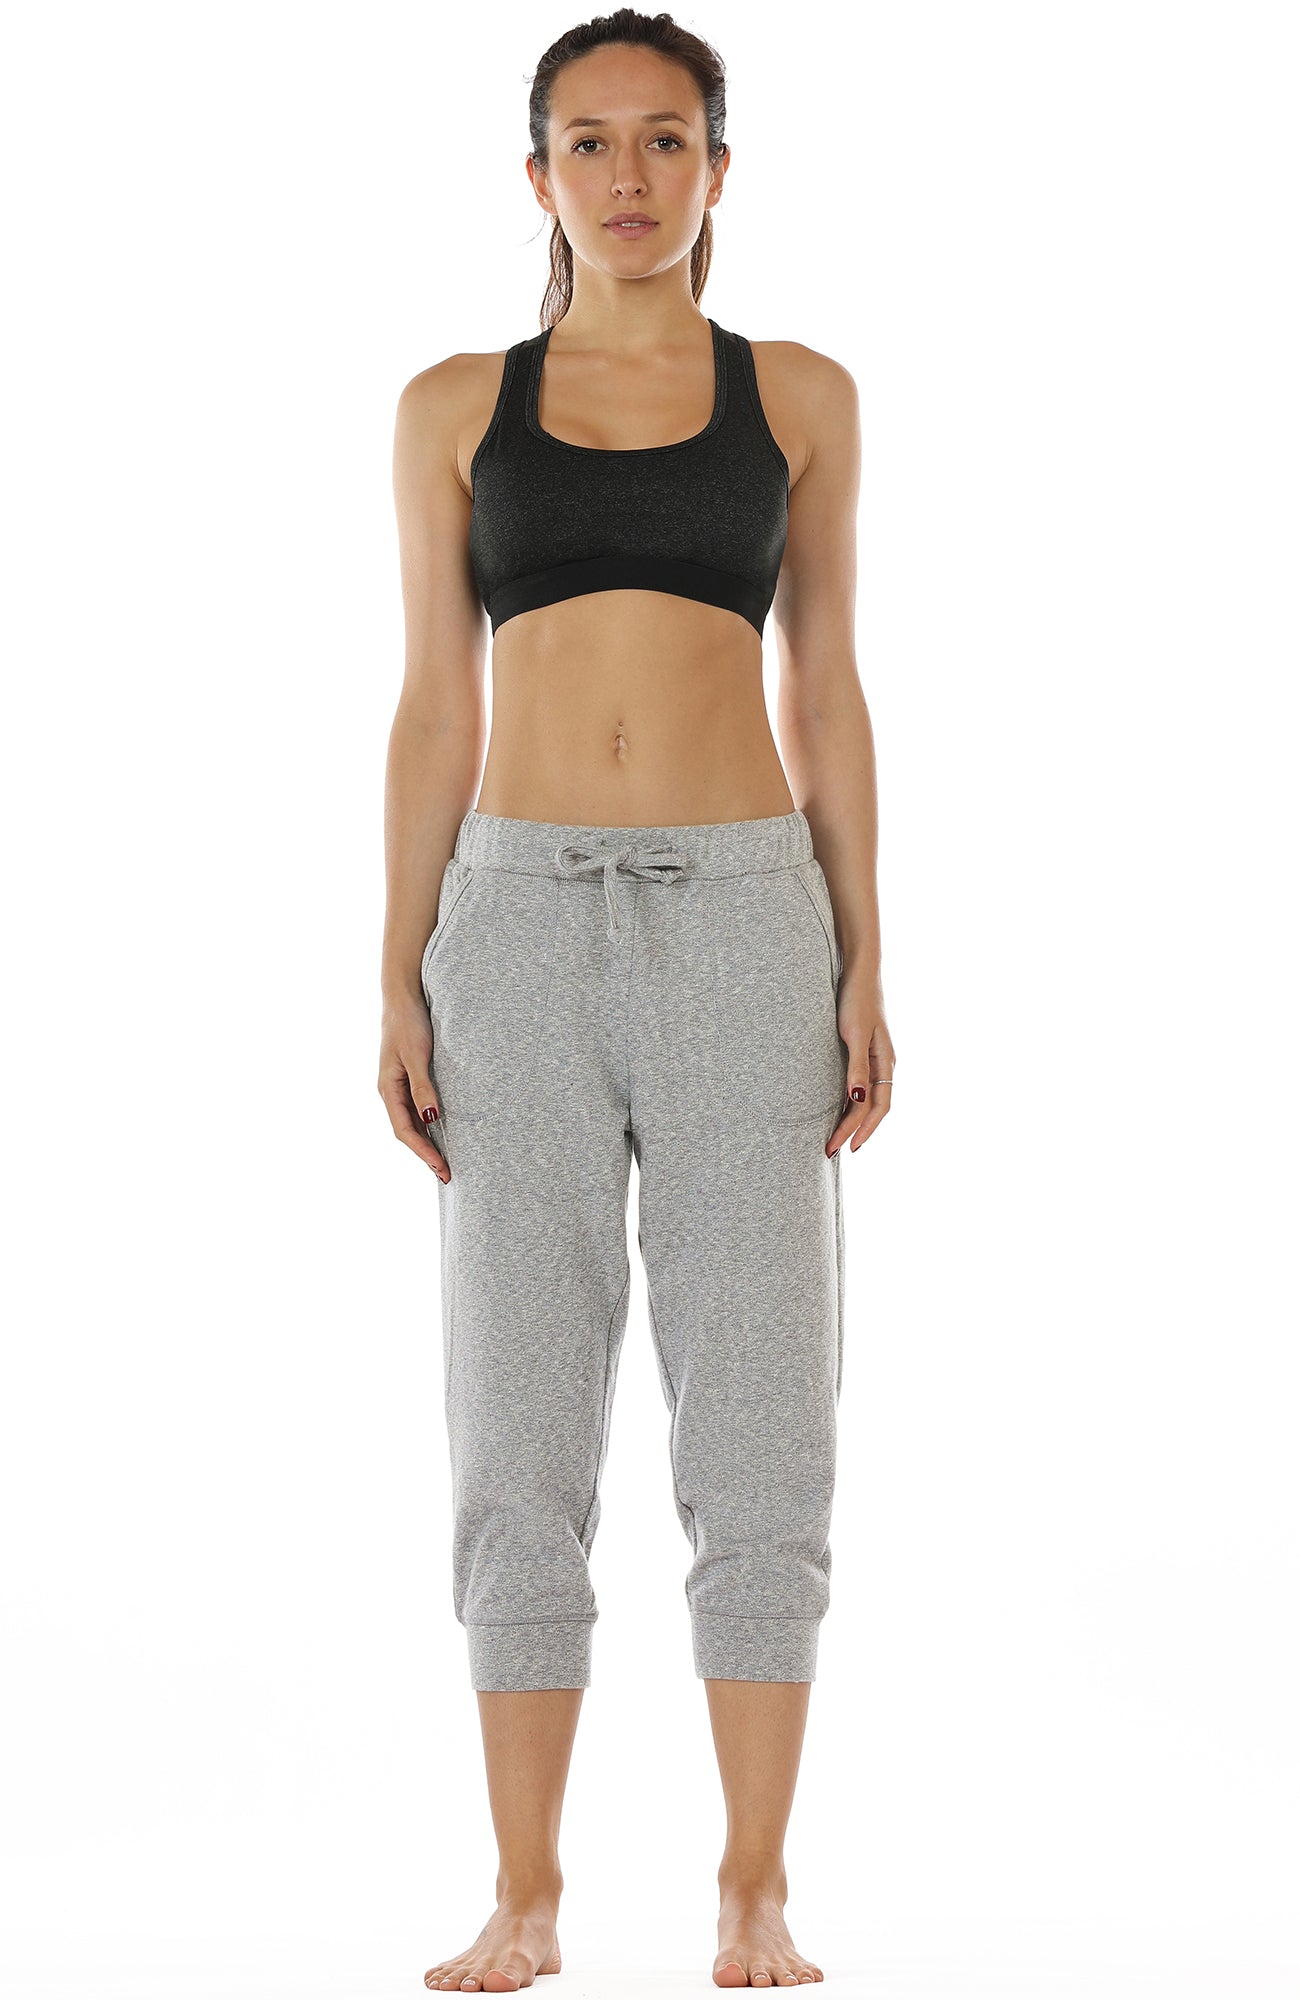 Ripzone Girls' Veil French Terry Sweat Pants